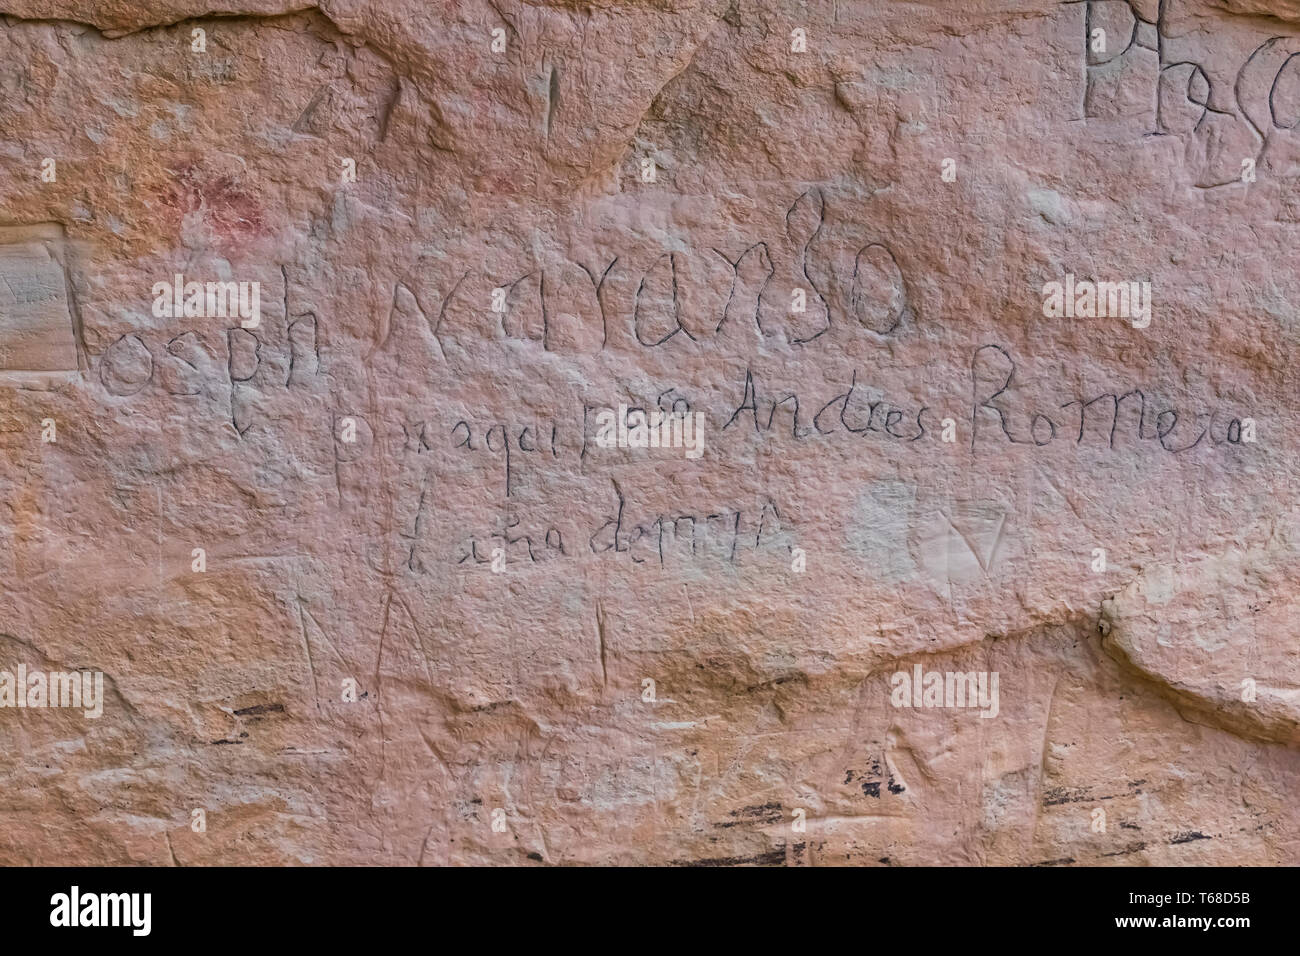 Spanish inscription from centuries ago, perhaps enhanced by an early NPS attempt at preservation, viewed along the Inscription Rock Trail in El Morro  Stock Photo